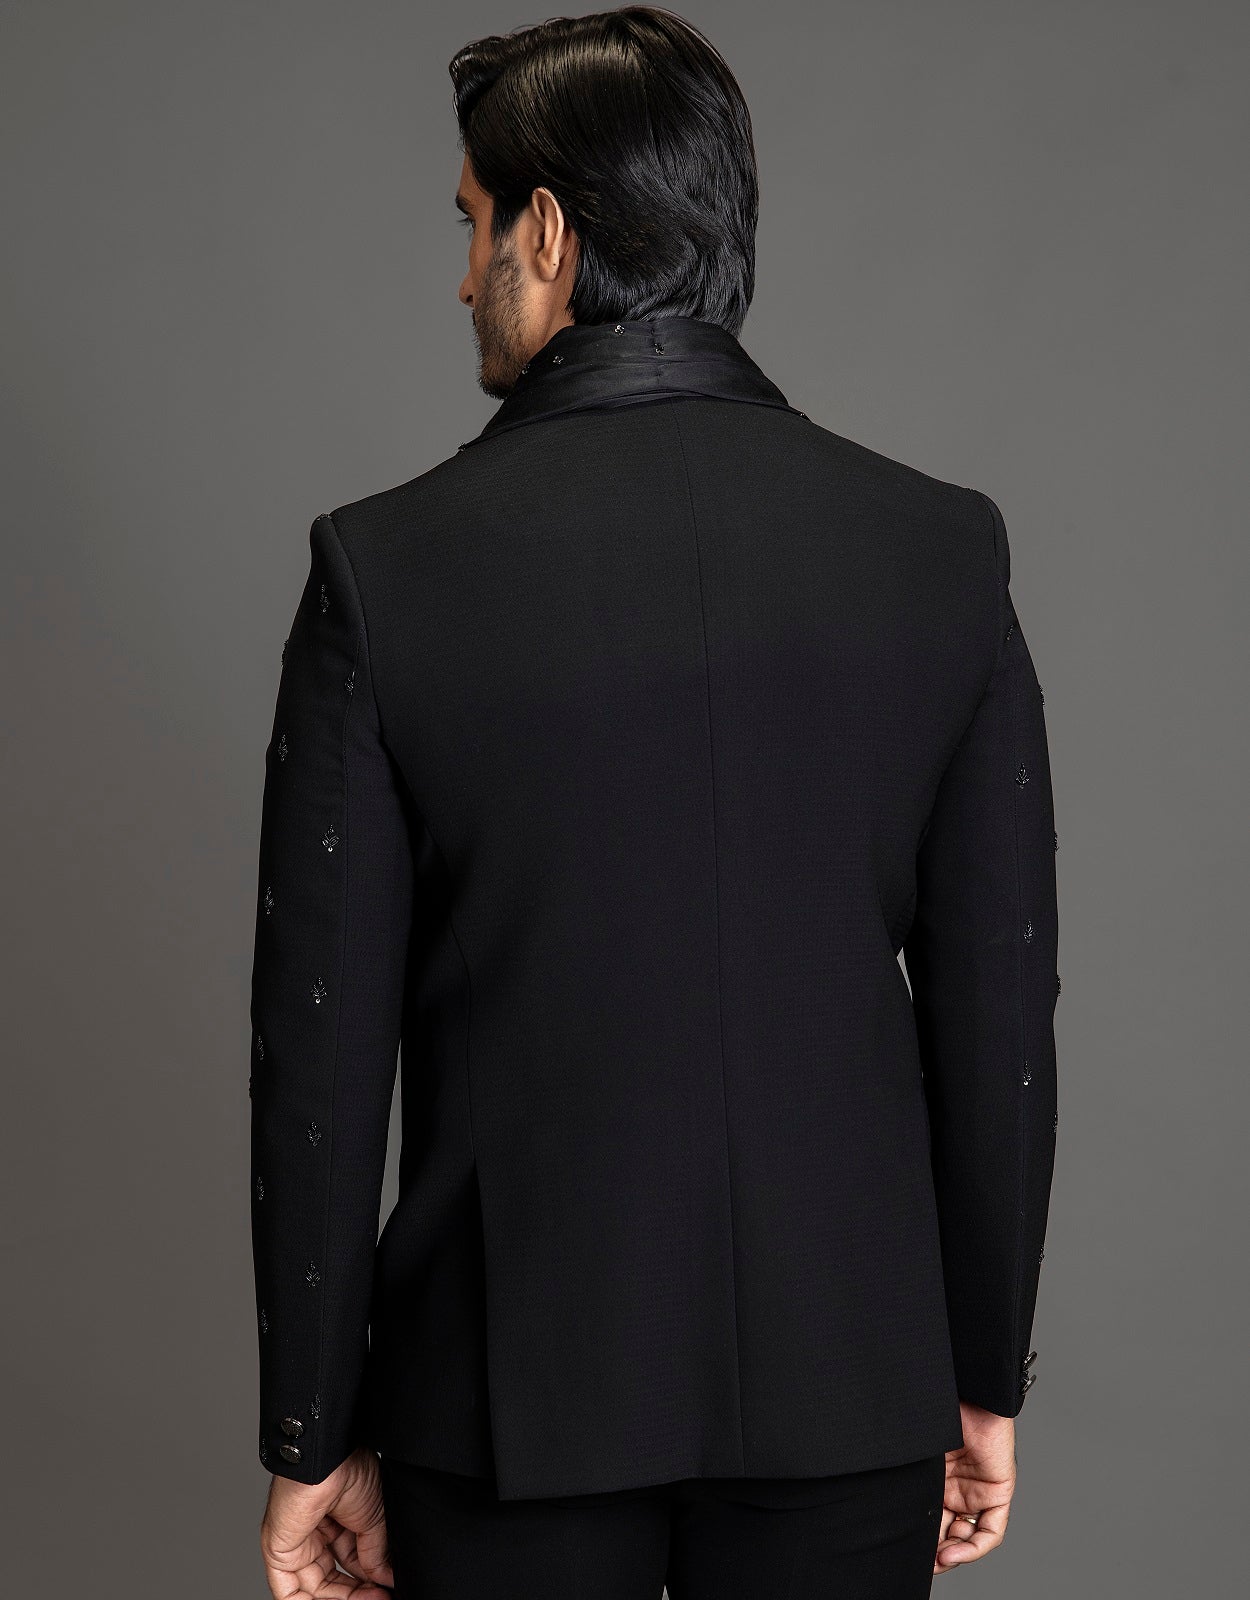 CLASSIC BLACK BANDHGALA WITH STOLE